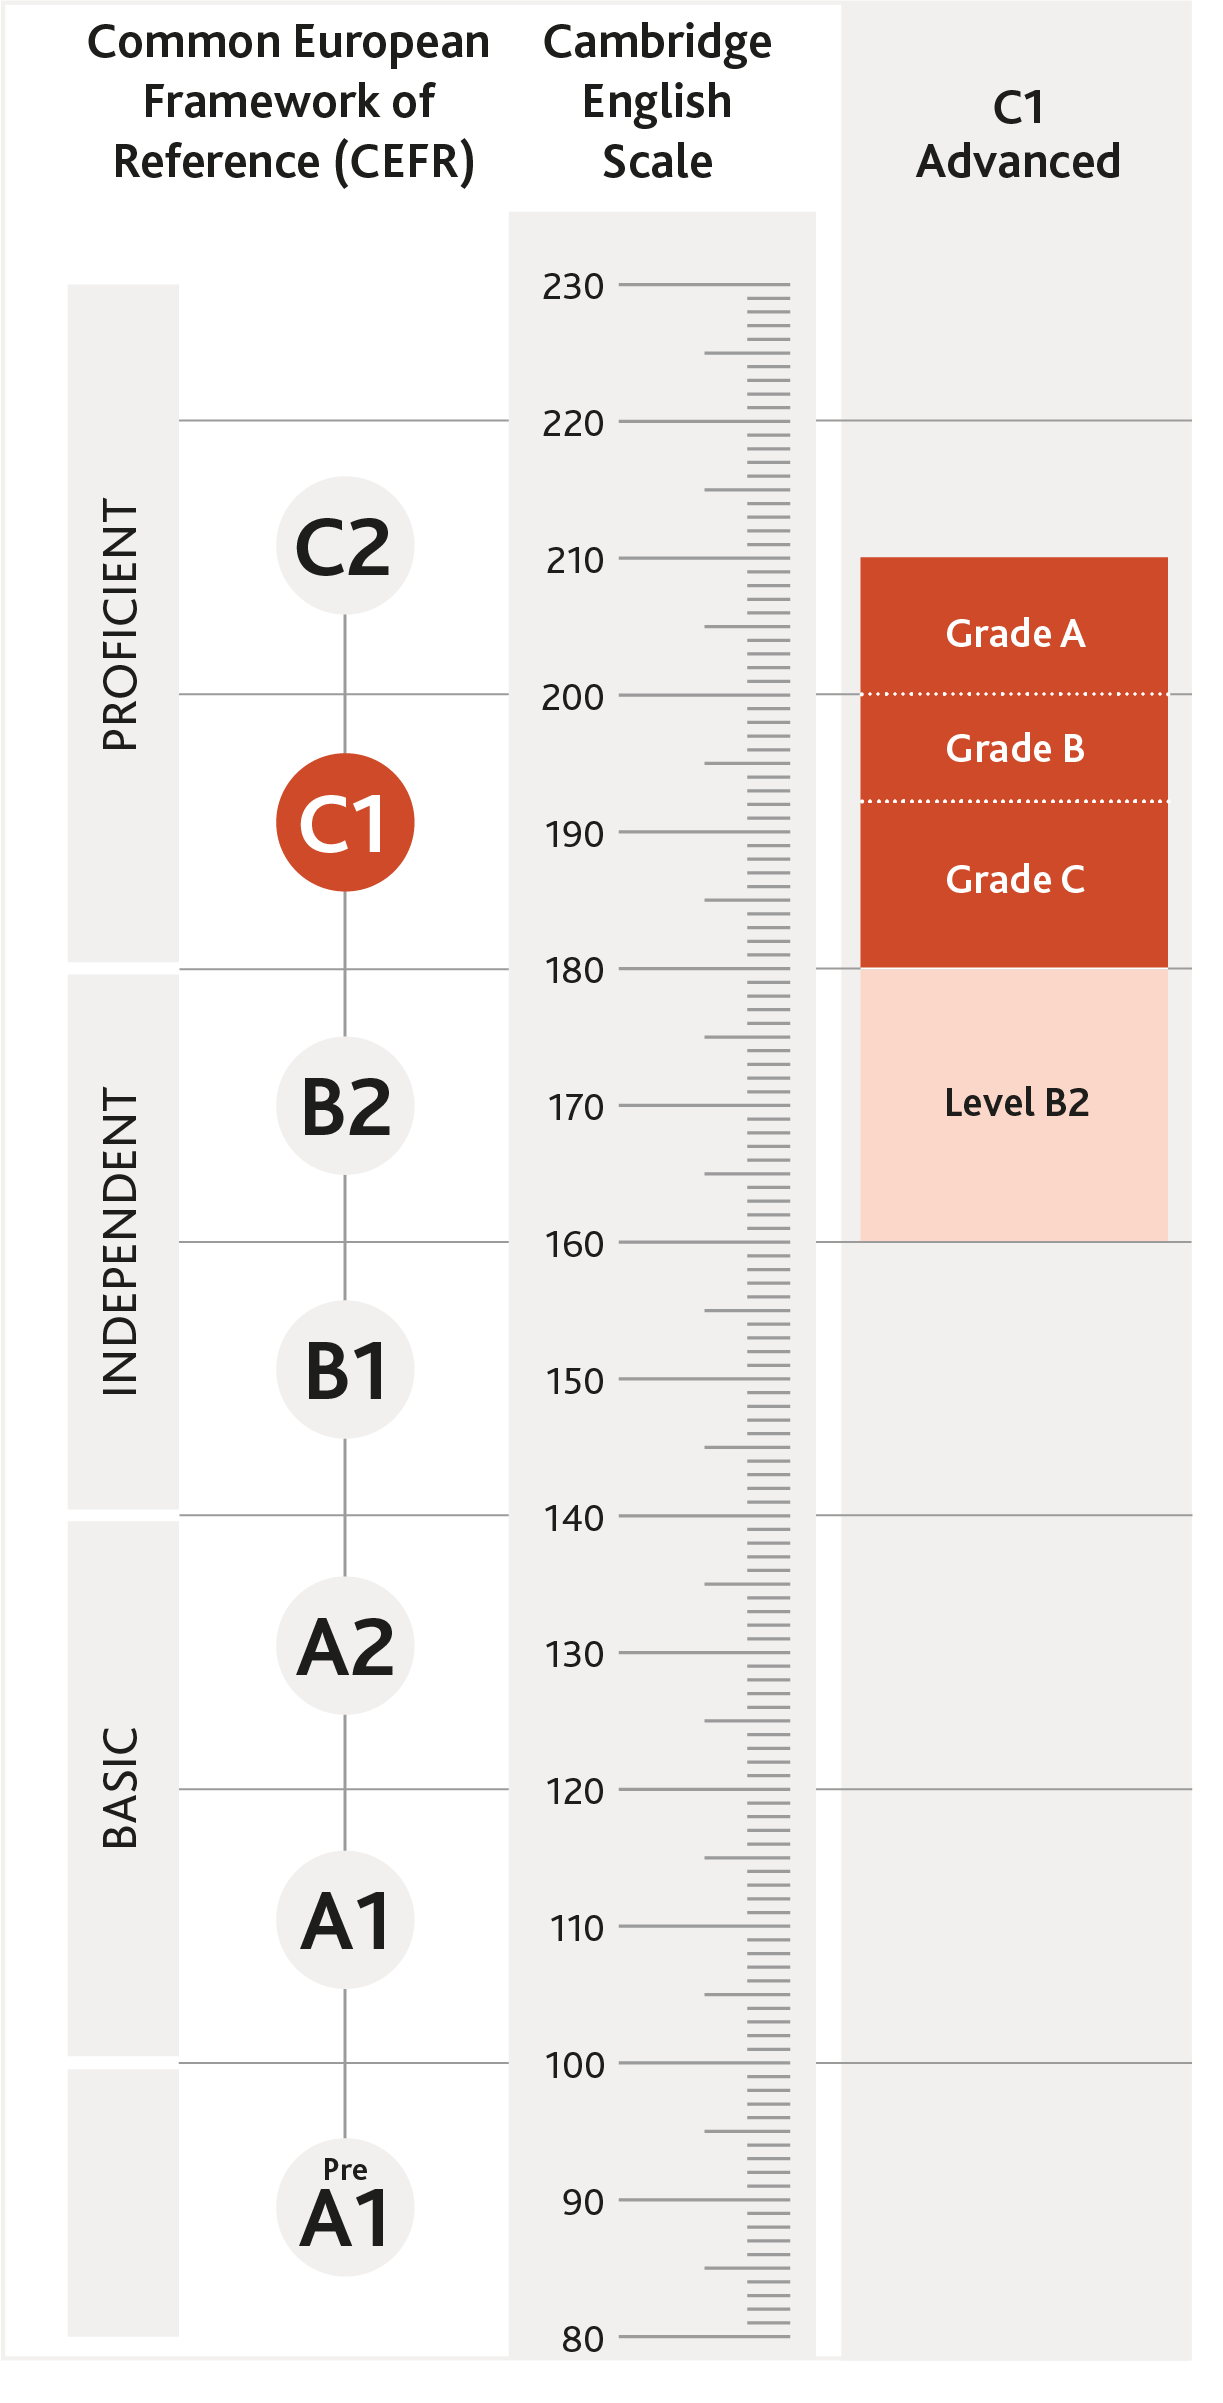 Diagram of where Cambridge English: Advanced is aligned on the CEFR and Cambridge English Scale